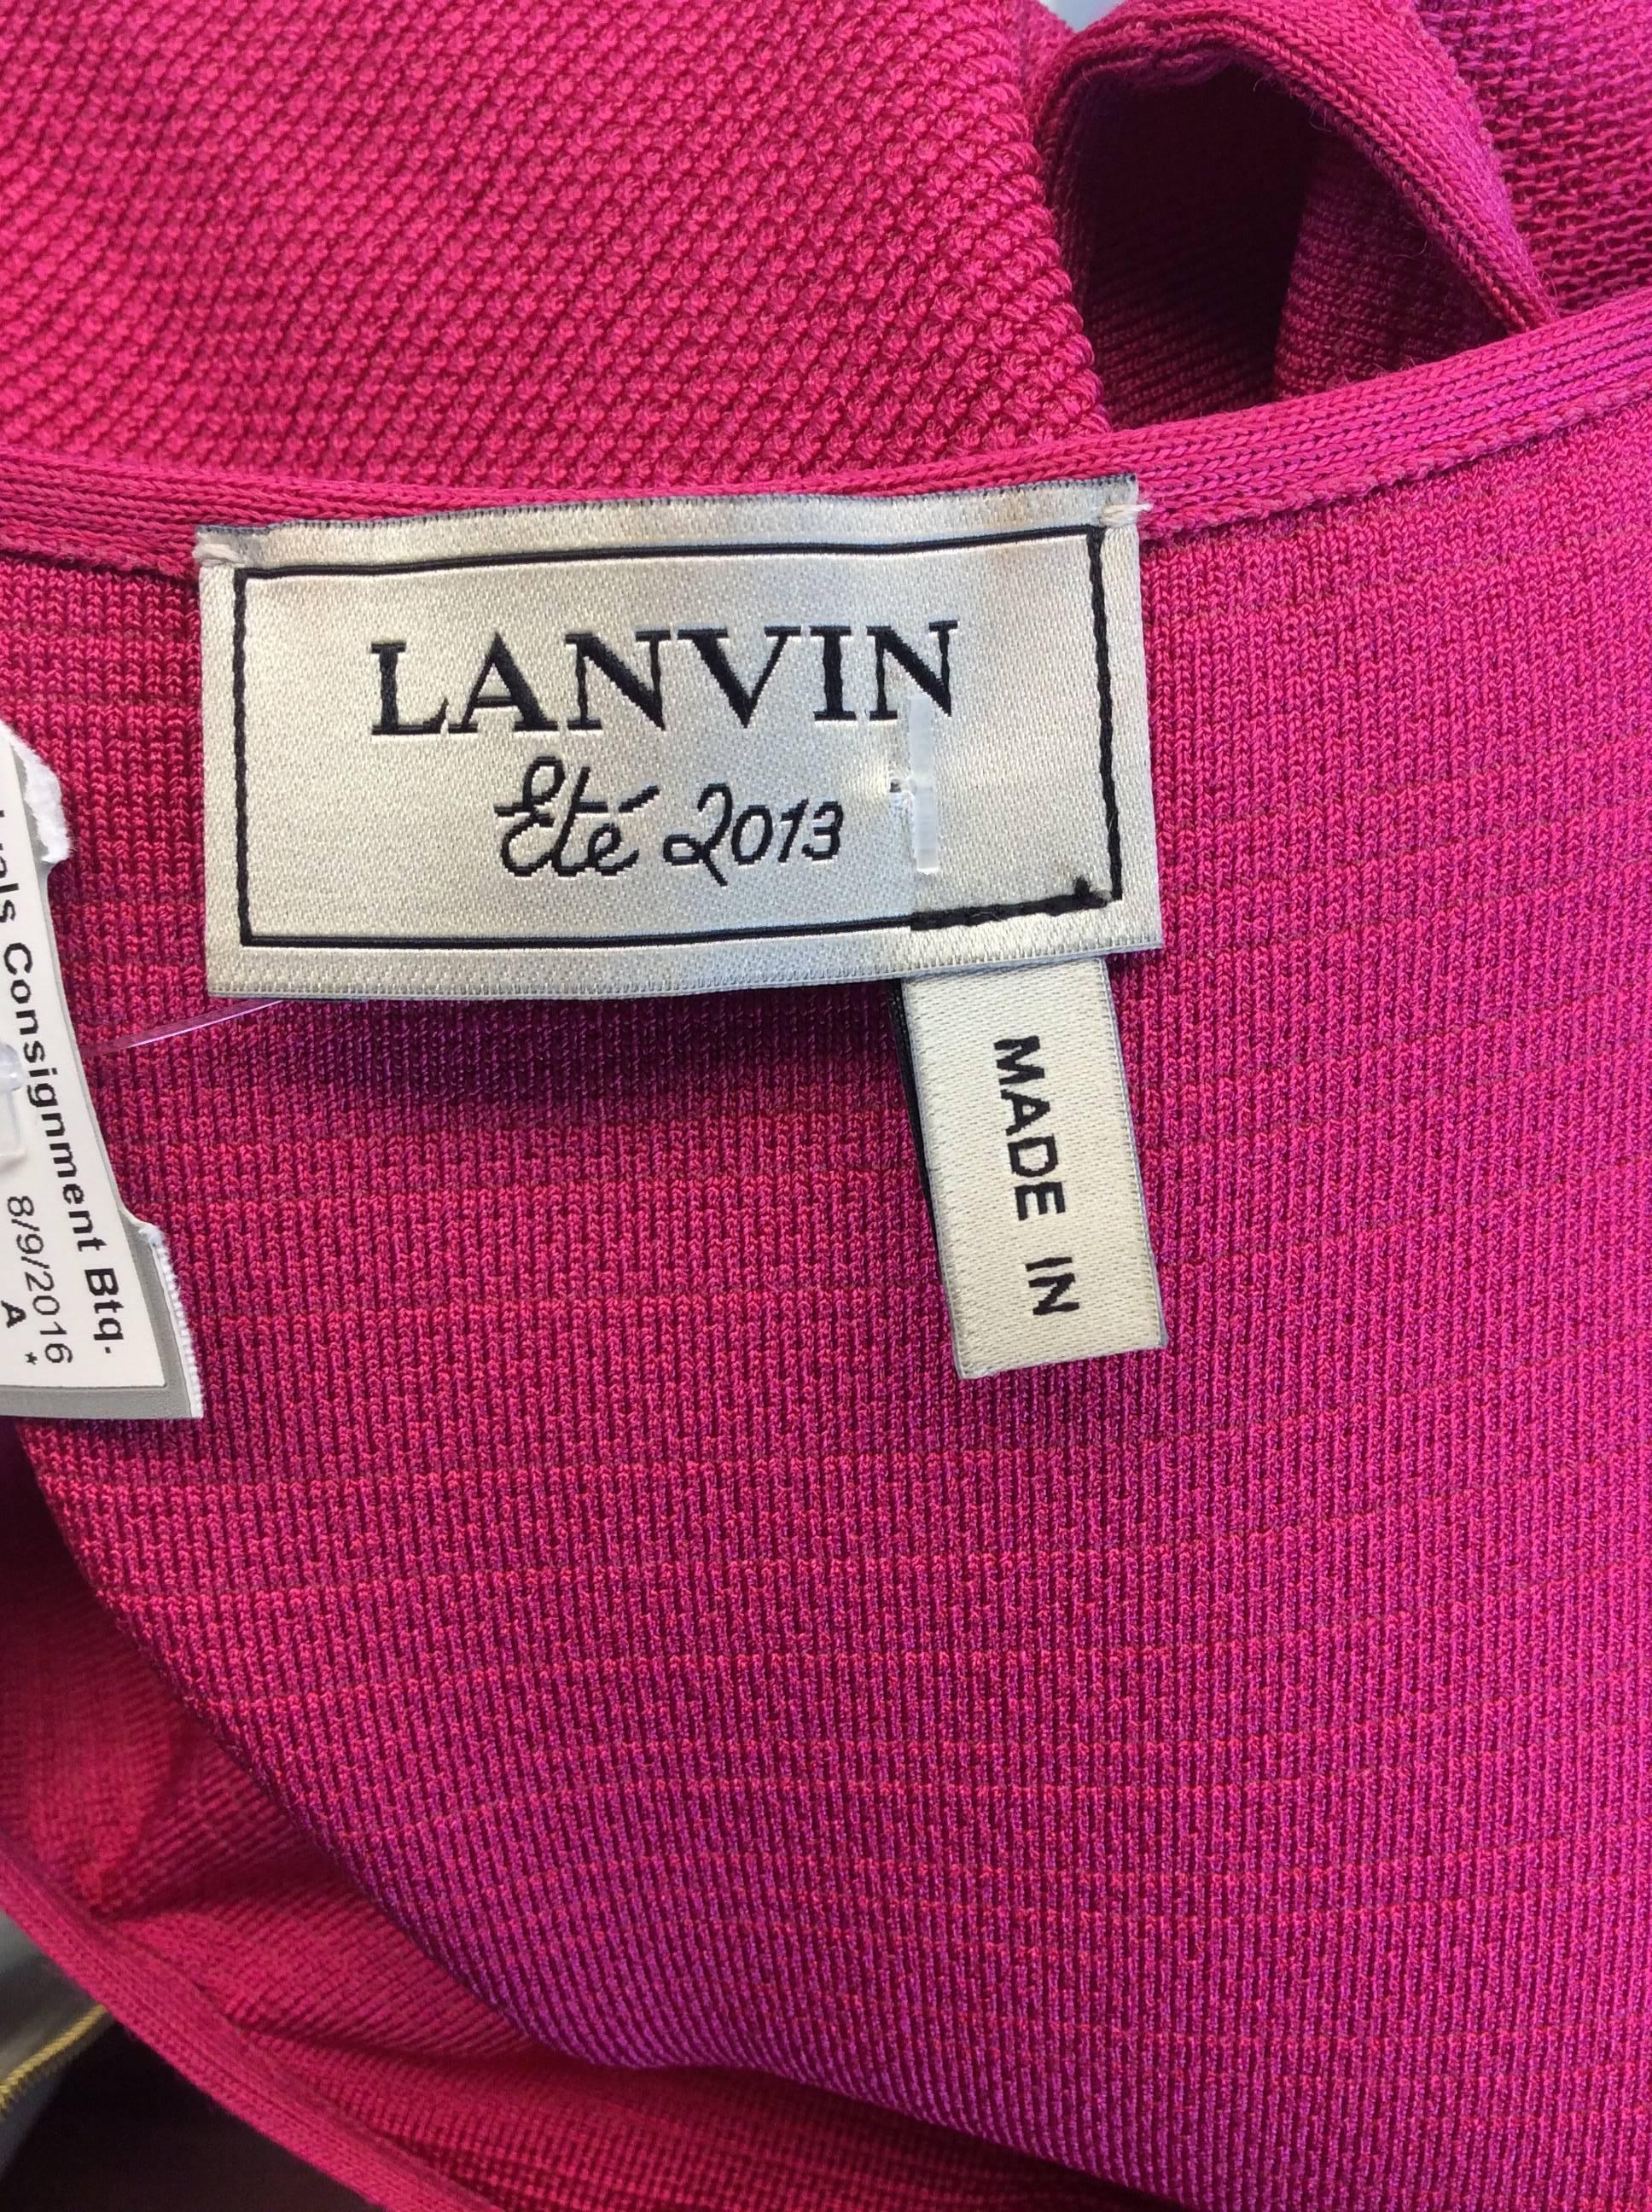 Lanvin Fuscia Knit Fit and Flare Dress For Sale 1